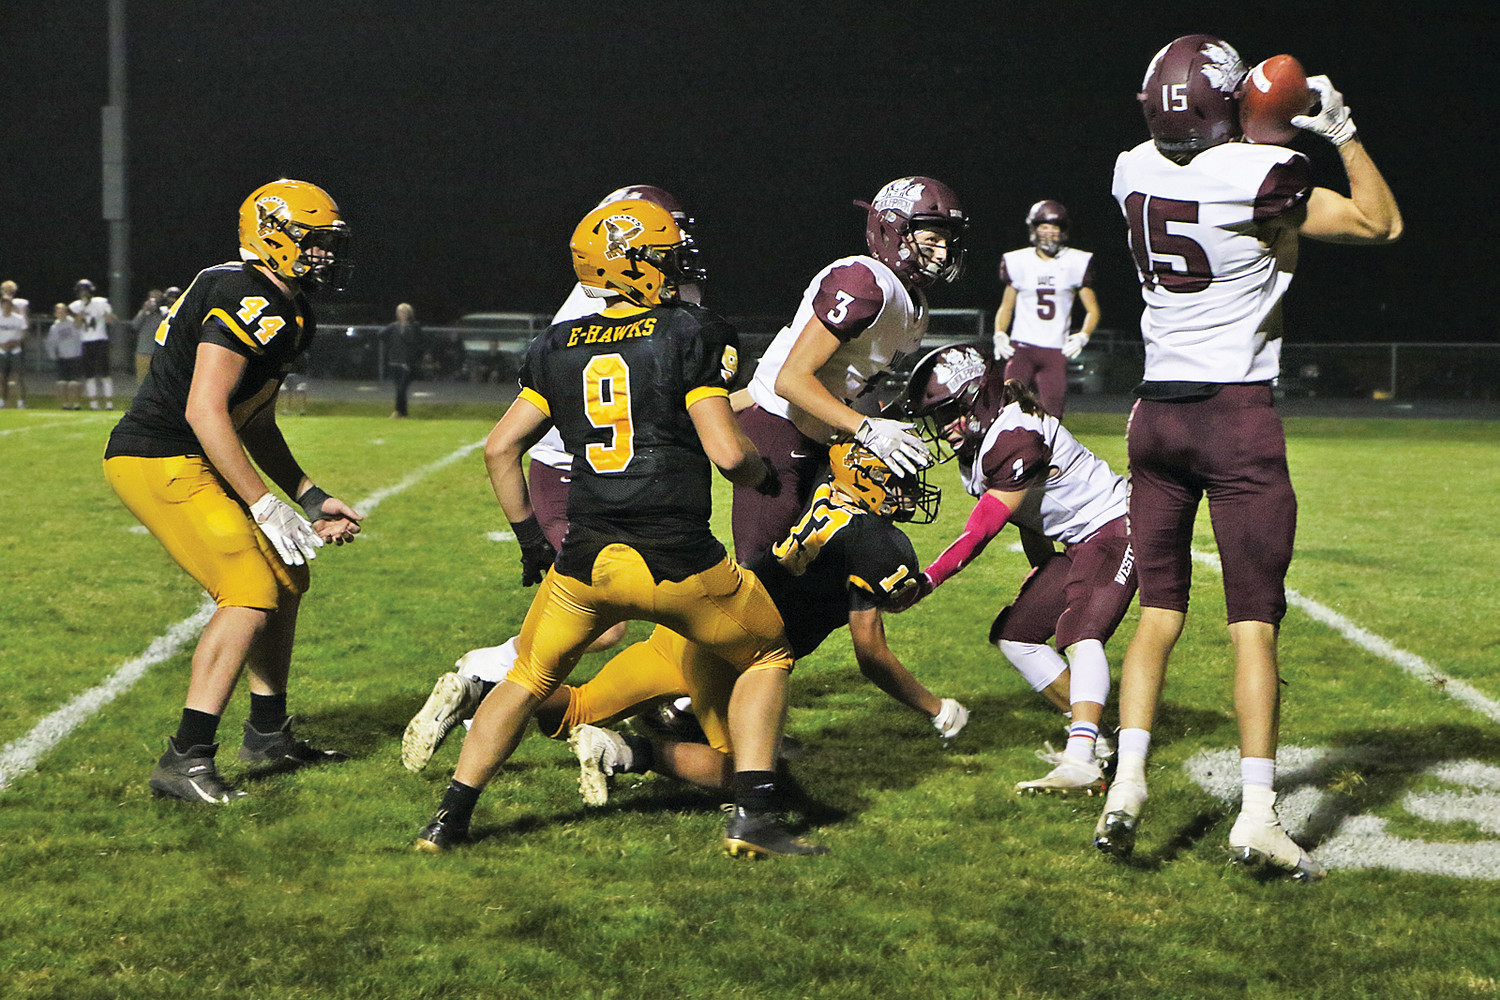 OH SO CLOSE -- With seconds left on the clock and behind by three points, Emmetsburg’s Ben Dunlap would find Cade Shirk at the 5-yard line for a 26-yard pass on 4th & 20. Unfortunately, Western Christian would force the ball loose to take possession and the 10-7 win. Pictured (from left) Matt Wirtz, Lex Kassel, and Shirk helplessly watch as the ball comes to rest in Wolfpack arms. The loss is Emmetsburg’s first this season.		       -- Joseph Schany photo